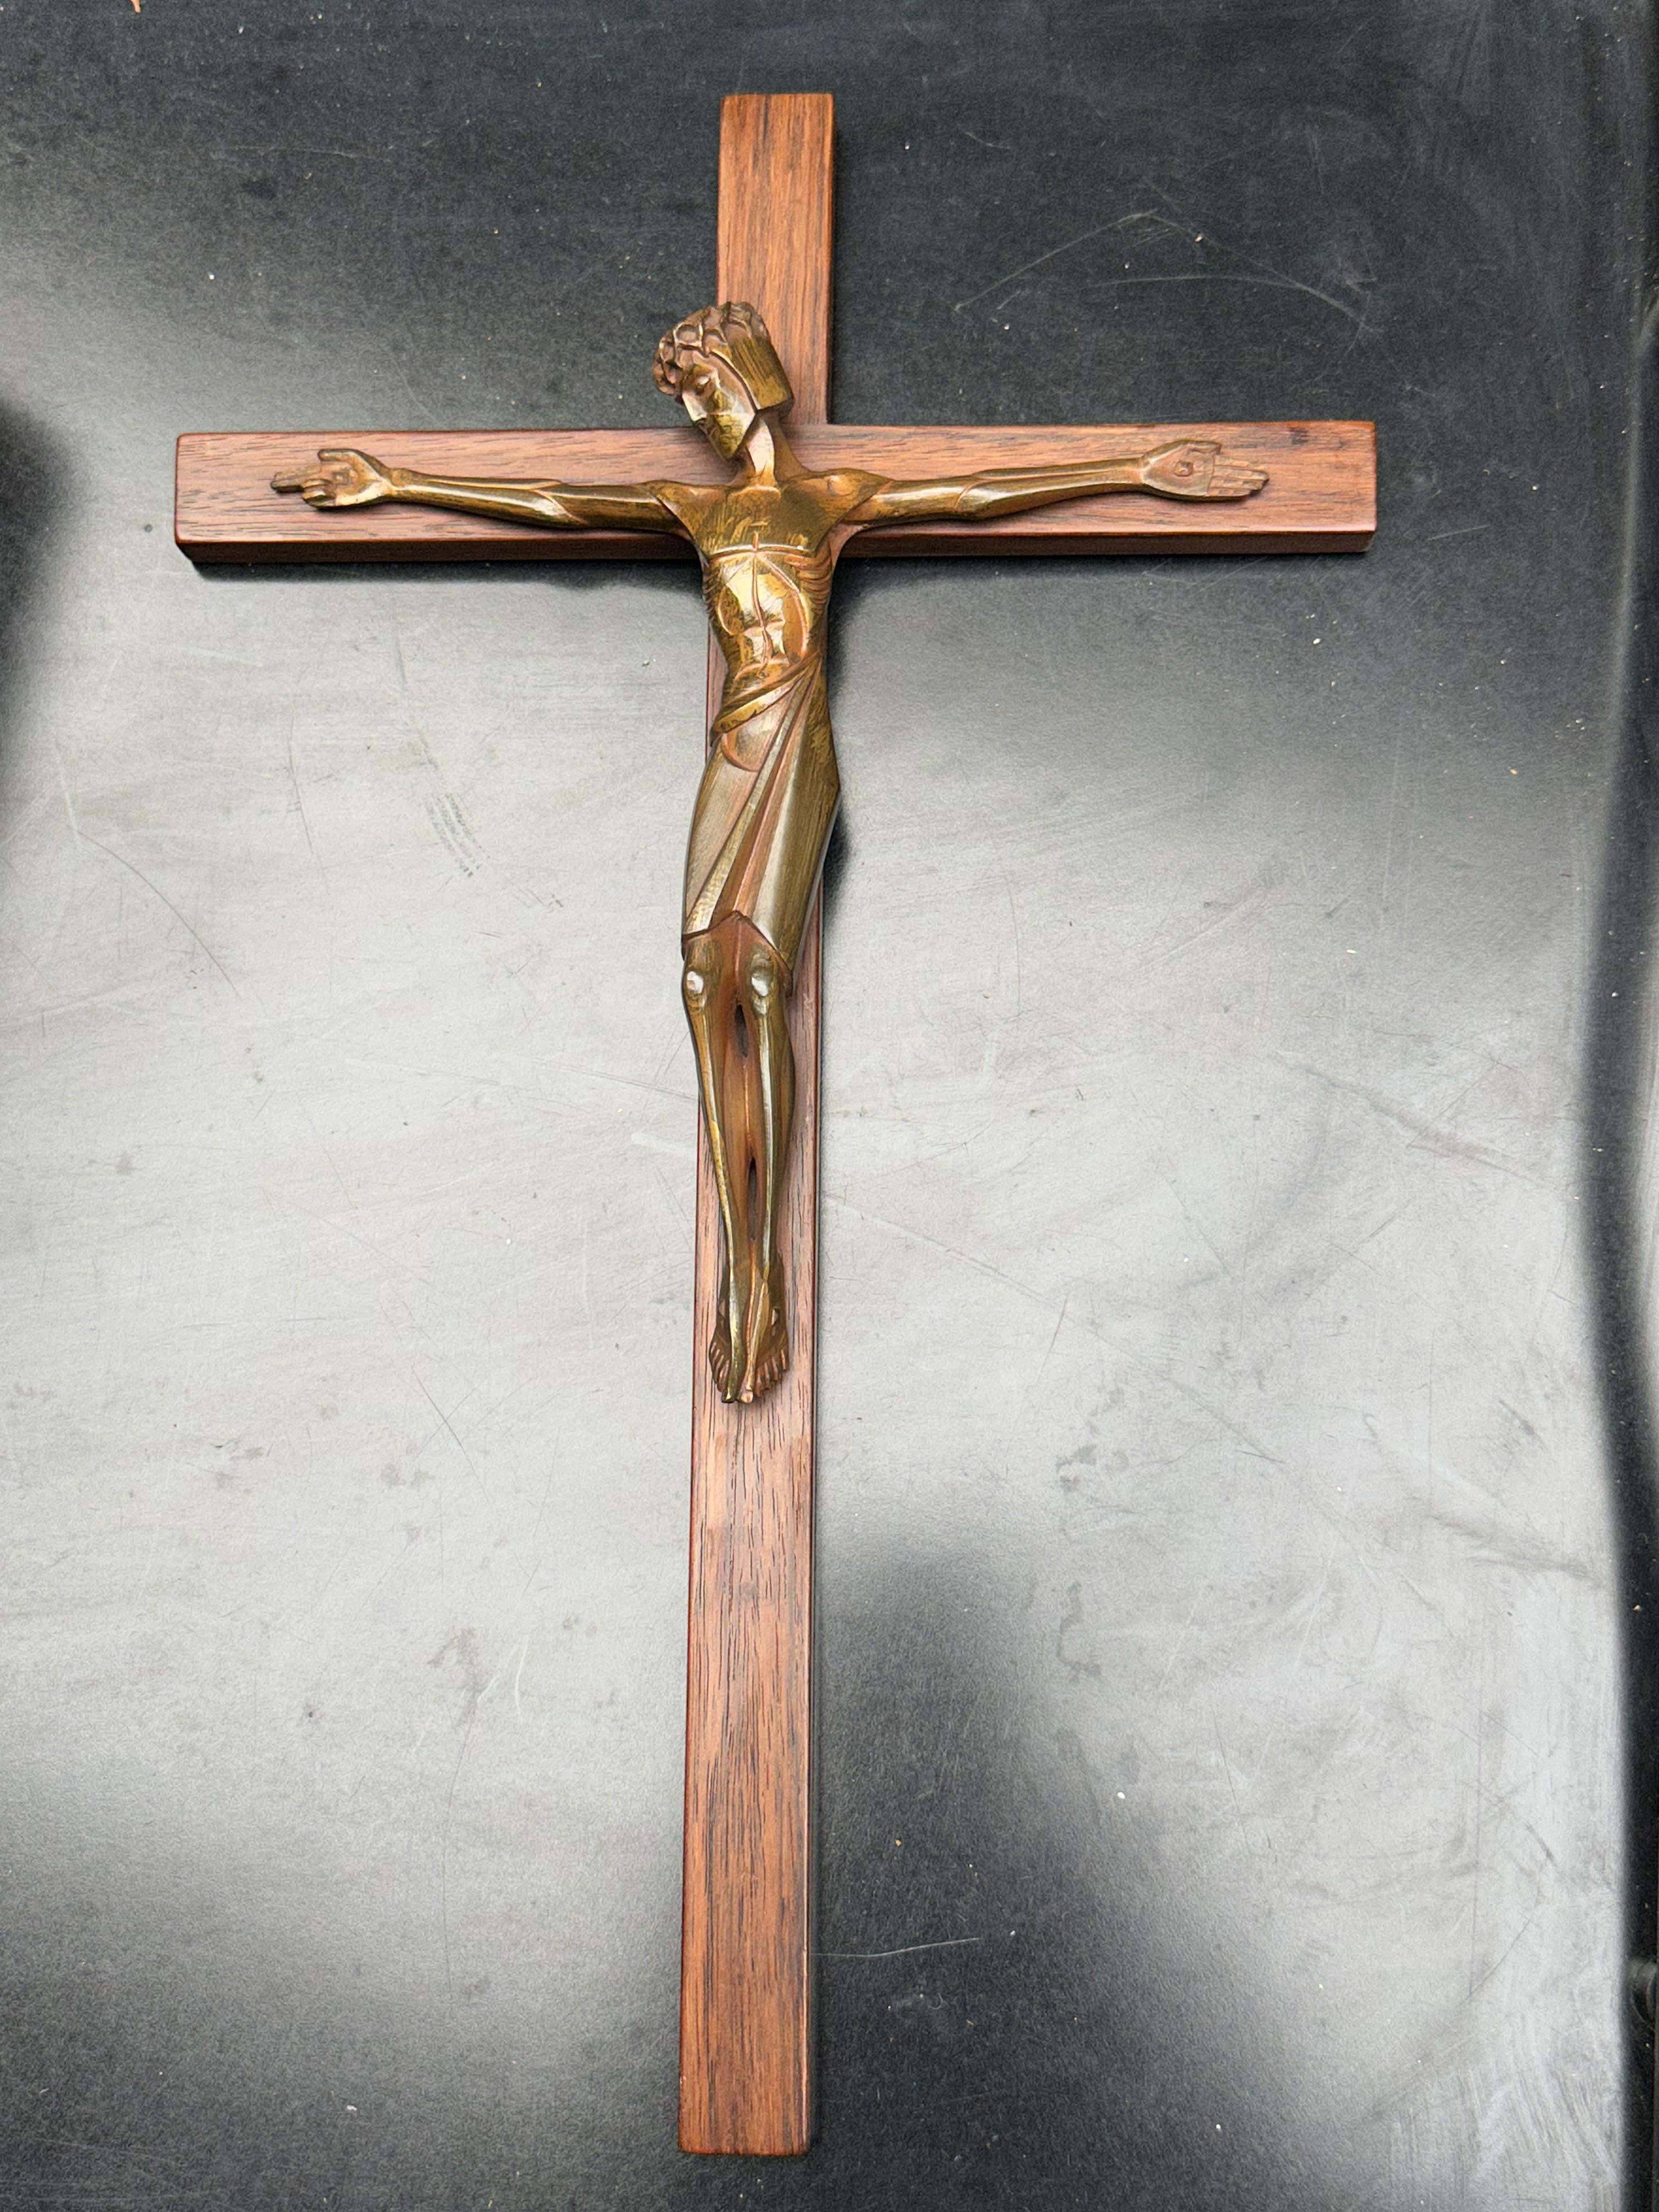 Rare crucifix and a wonderful Art Deco work of religious art. Made and marked by Brom, Utrecht.

Brom of Utrecht was a family (or dynasty) of goldsmiths in the Dutch city of Utrecht and they were known for creating some of the best ecclesiastical